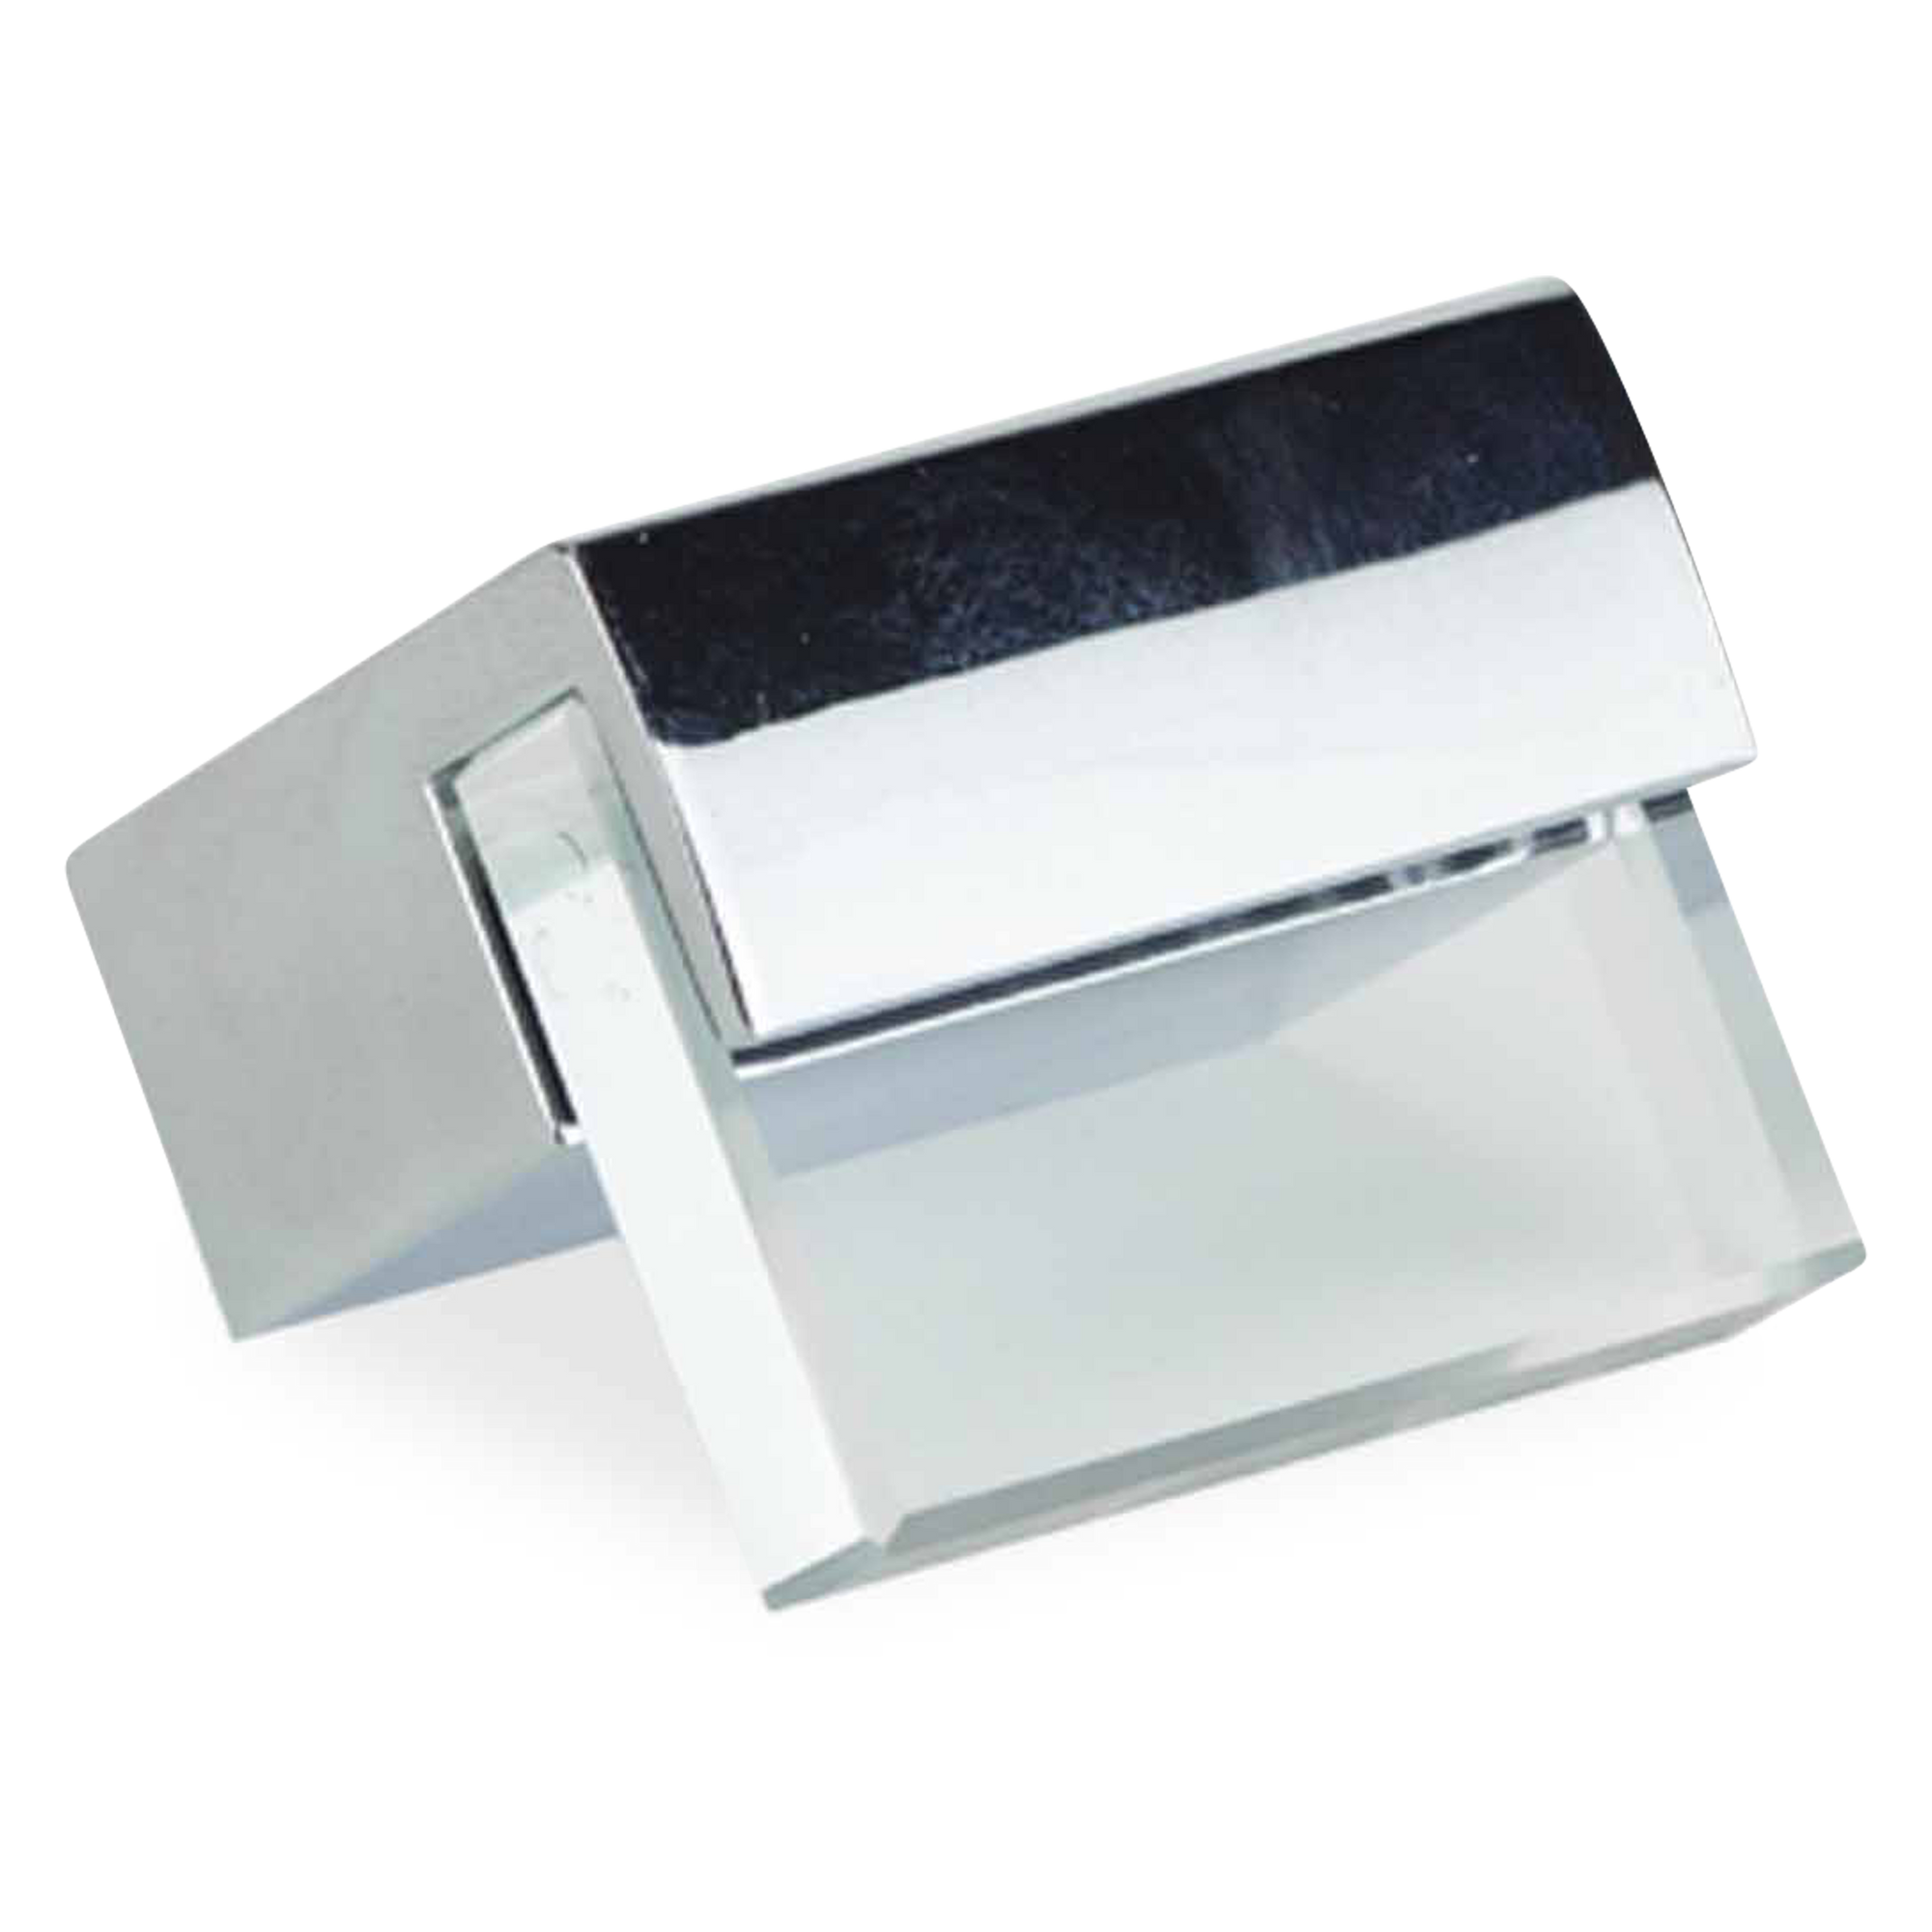 The Aeorlin Knob features a modern look, made of acrylic with chrome accents.